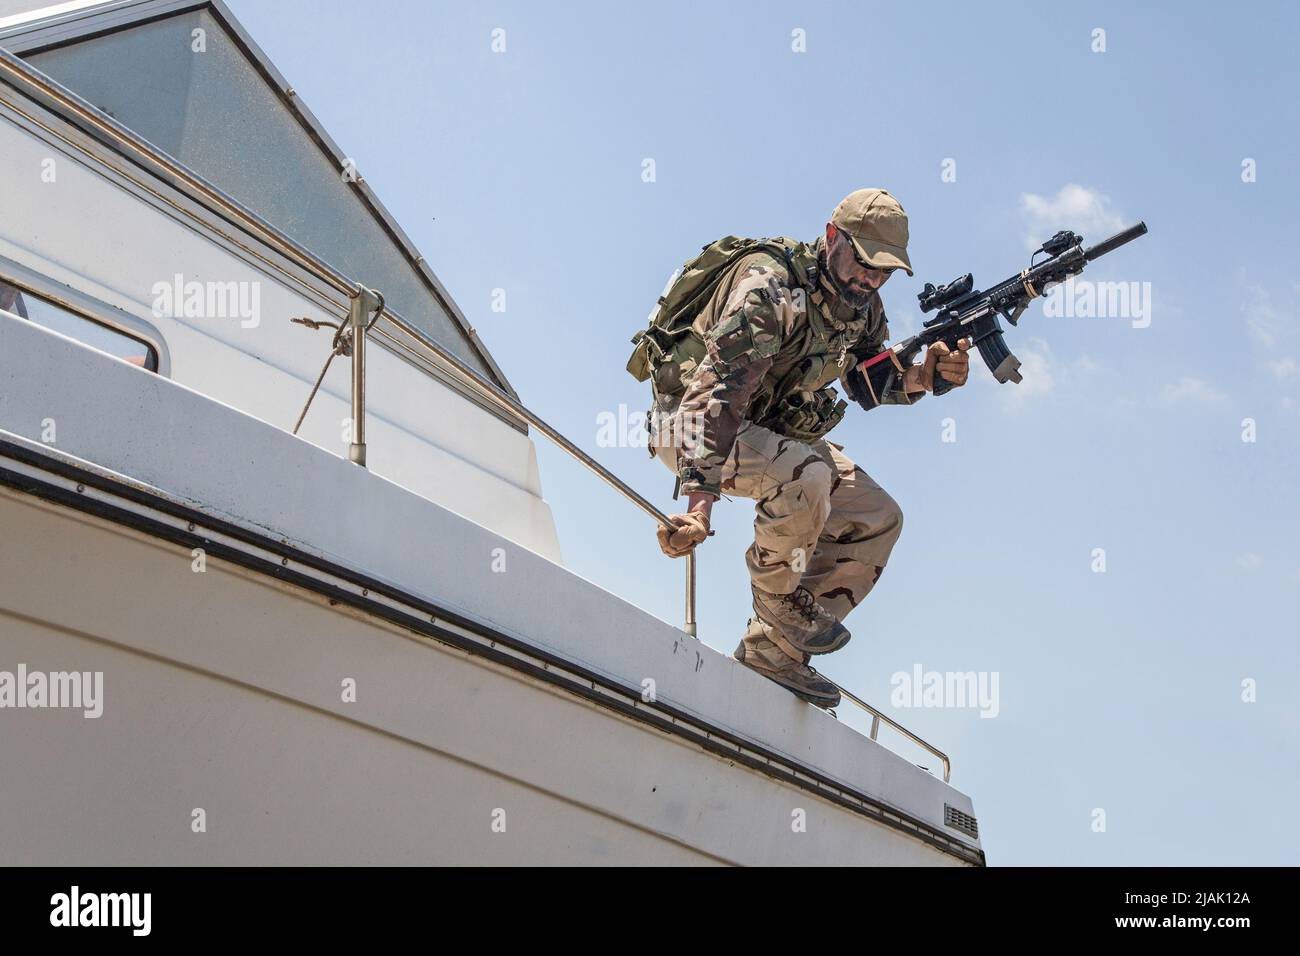 Special forces soldier jumping from a speed boat deck, landing on shore with assault rifle. Stock Photo